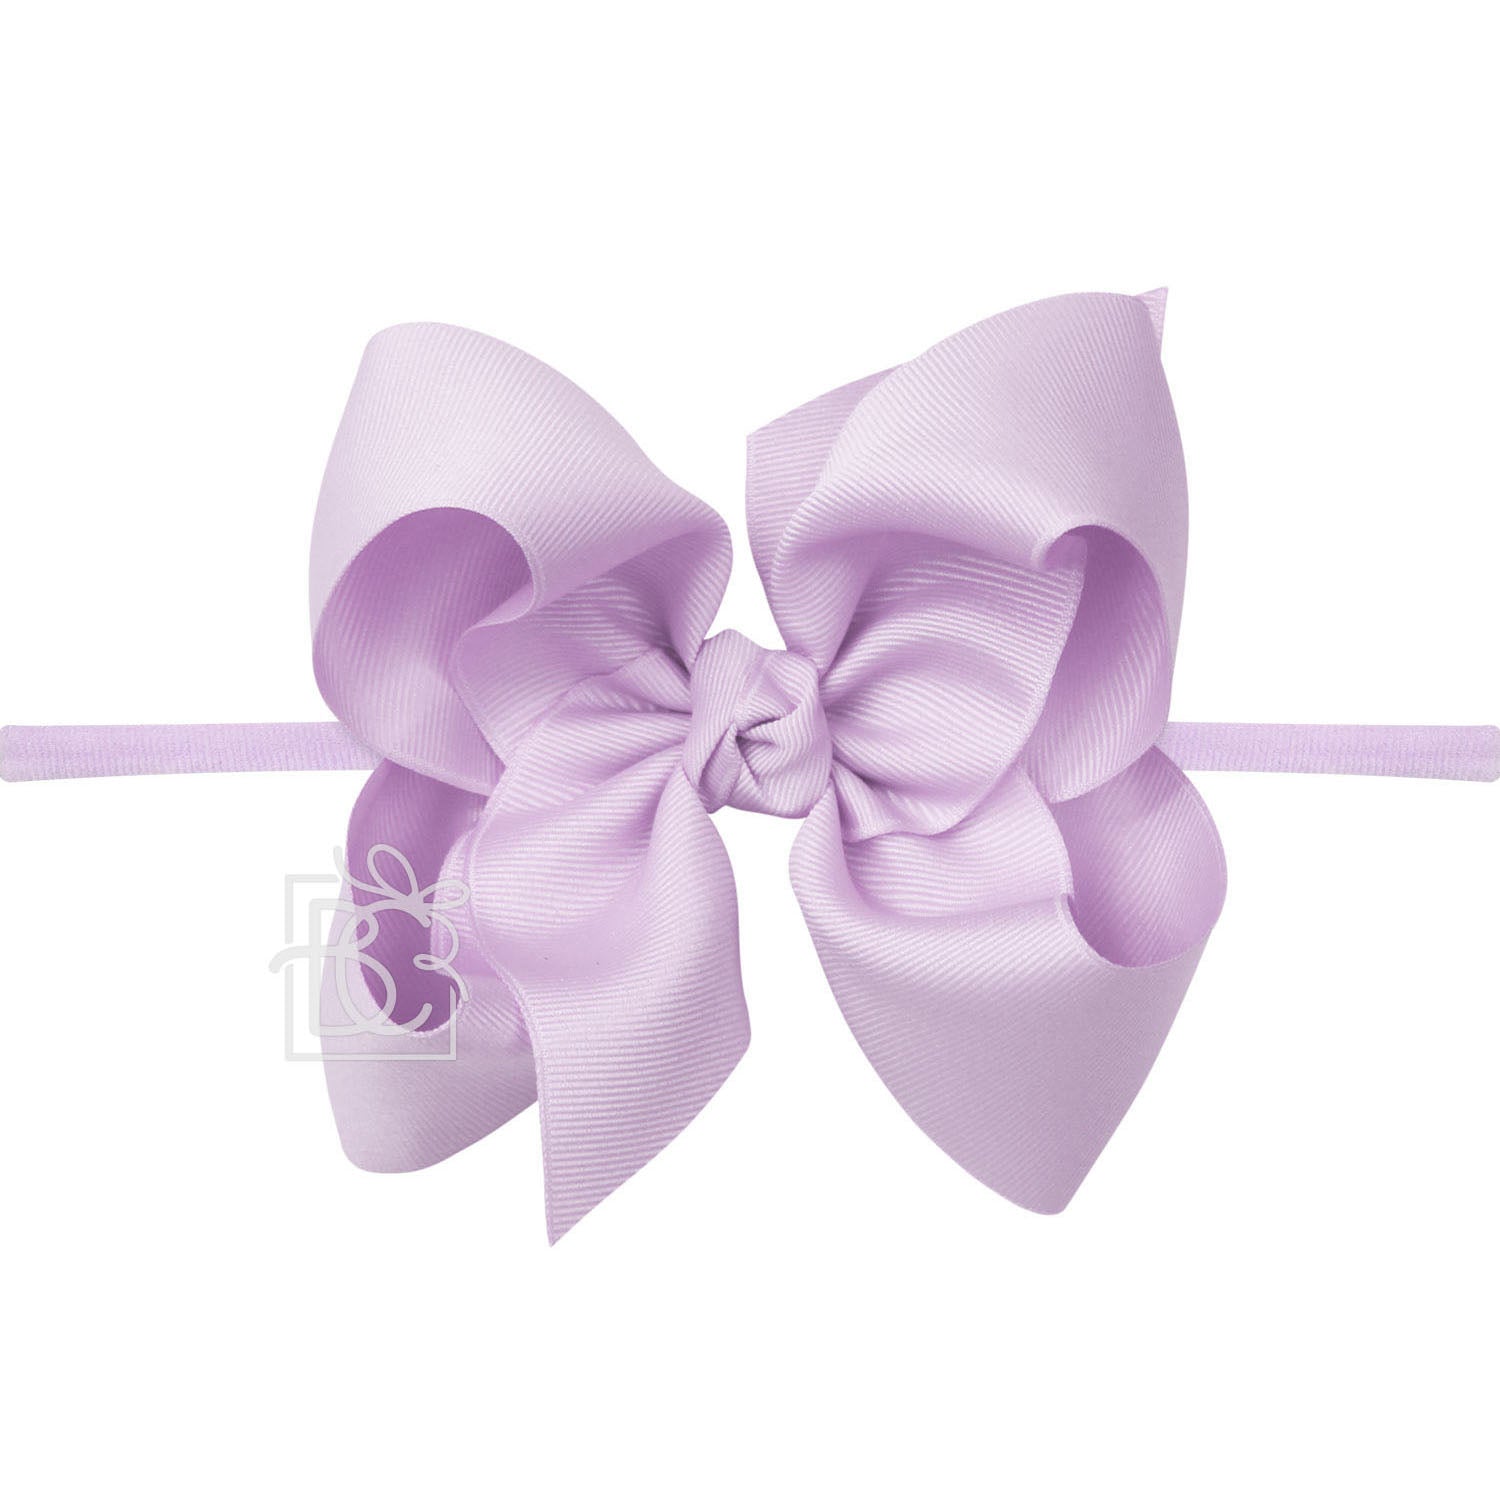 Nylon Headband with Huge Bow in Light Orchid  - Doodlebug's Children's Boutique